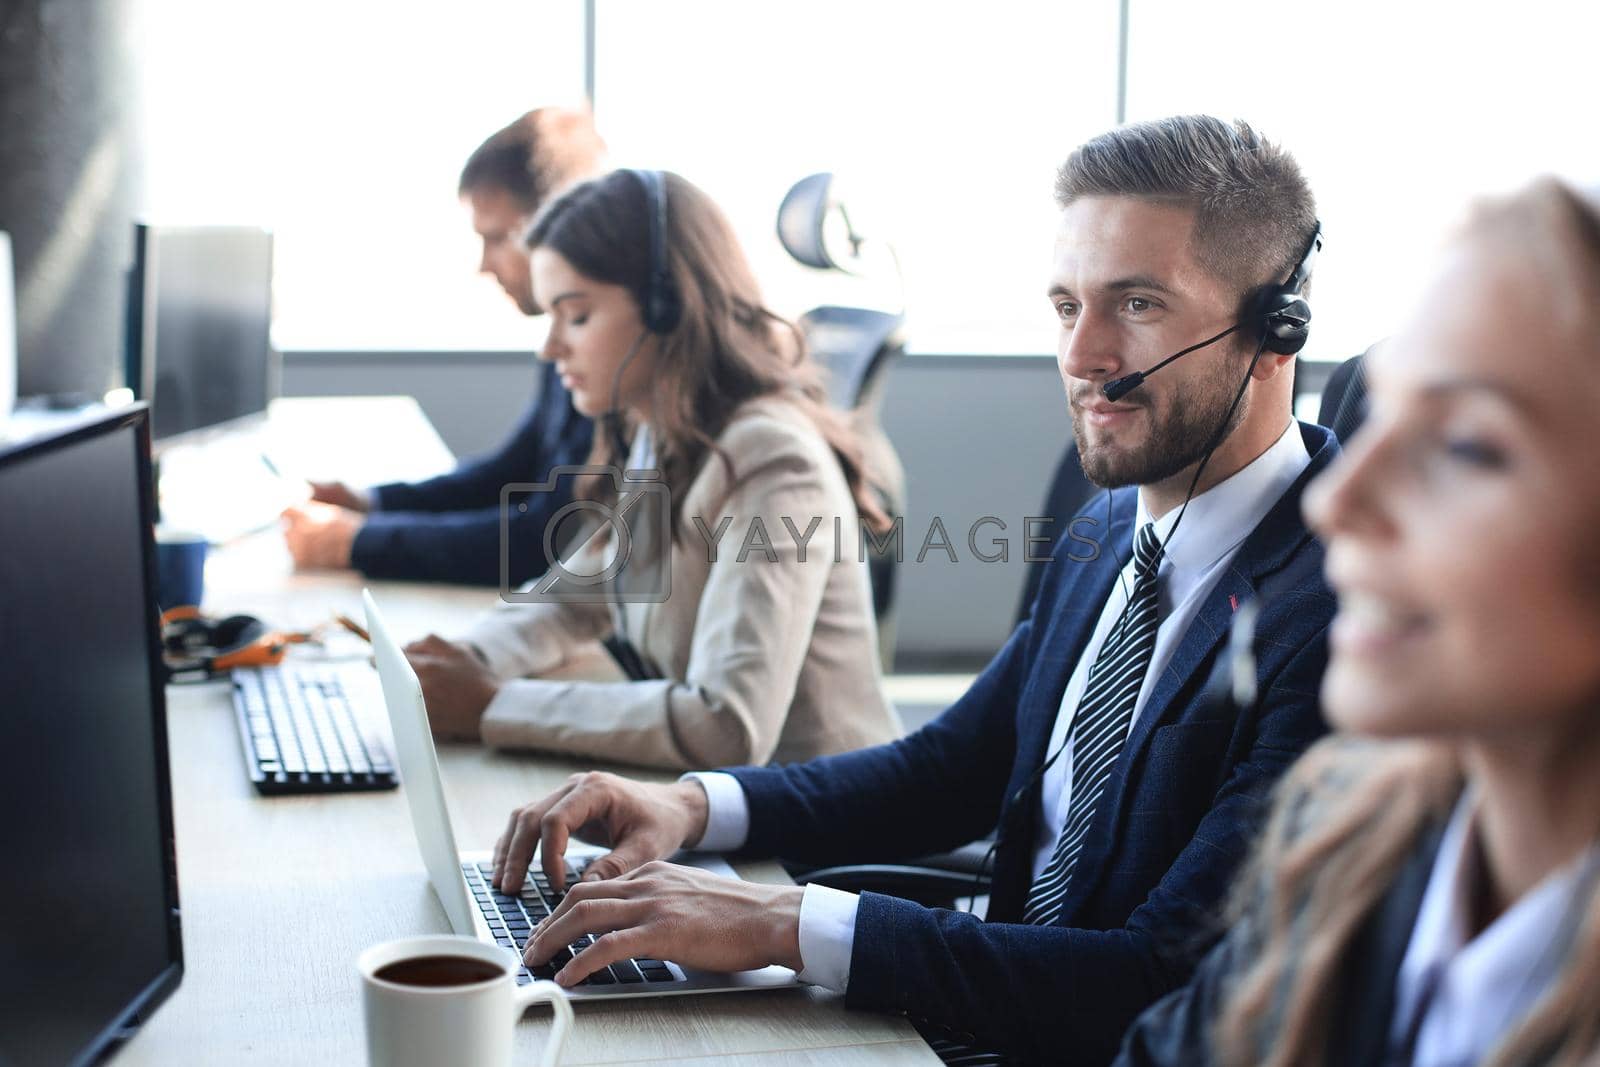 Royalty free image of Portrait of call center worker accompanied by his team. Smiling customer support operator at work. by tsyhun